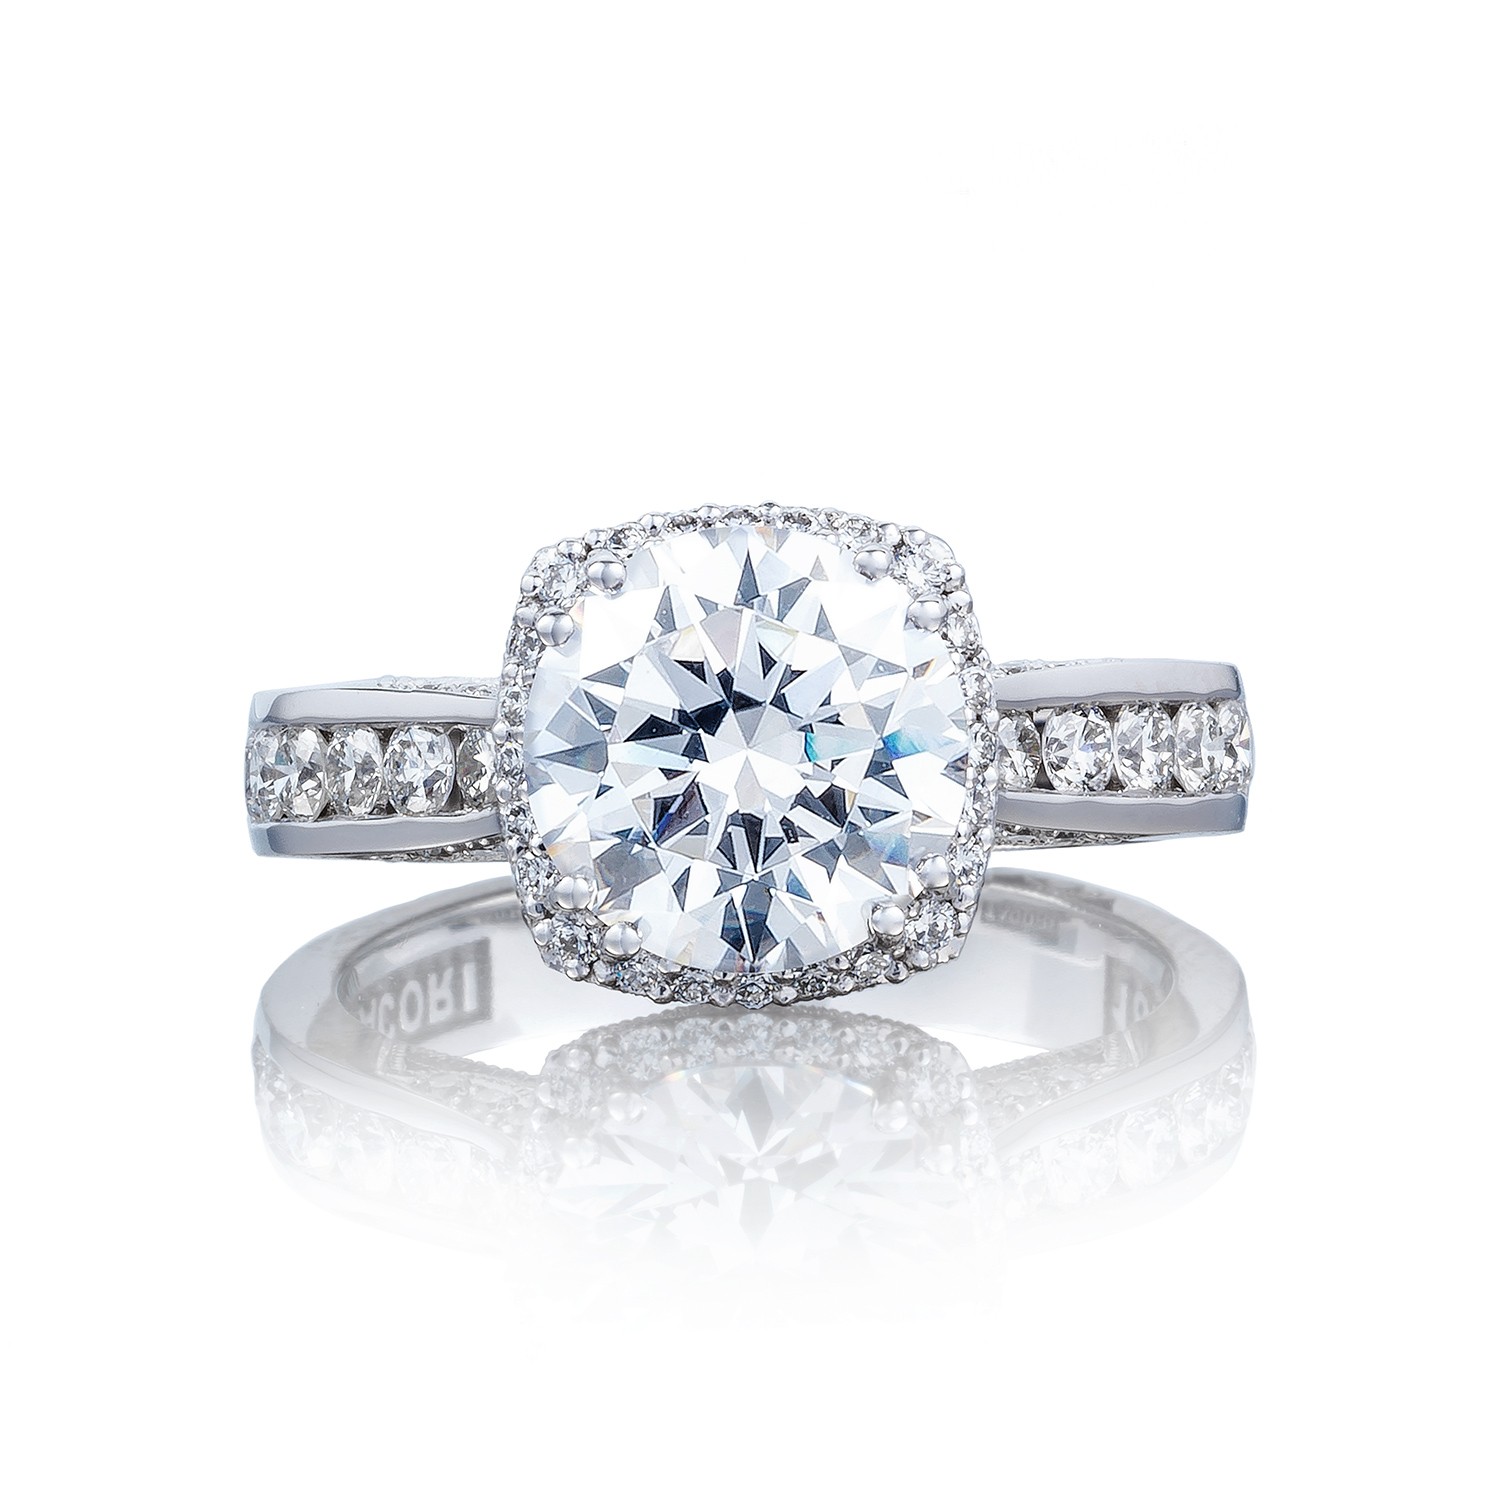 Tacori-engagement-ring-at-DK-Gems-online-diamond-engagement-rings-store-and-BEST-jewelry-stores-in-St-Maarten-2646-35rdc85-_10.jpg